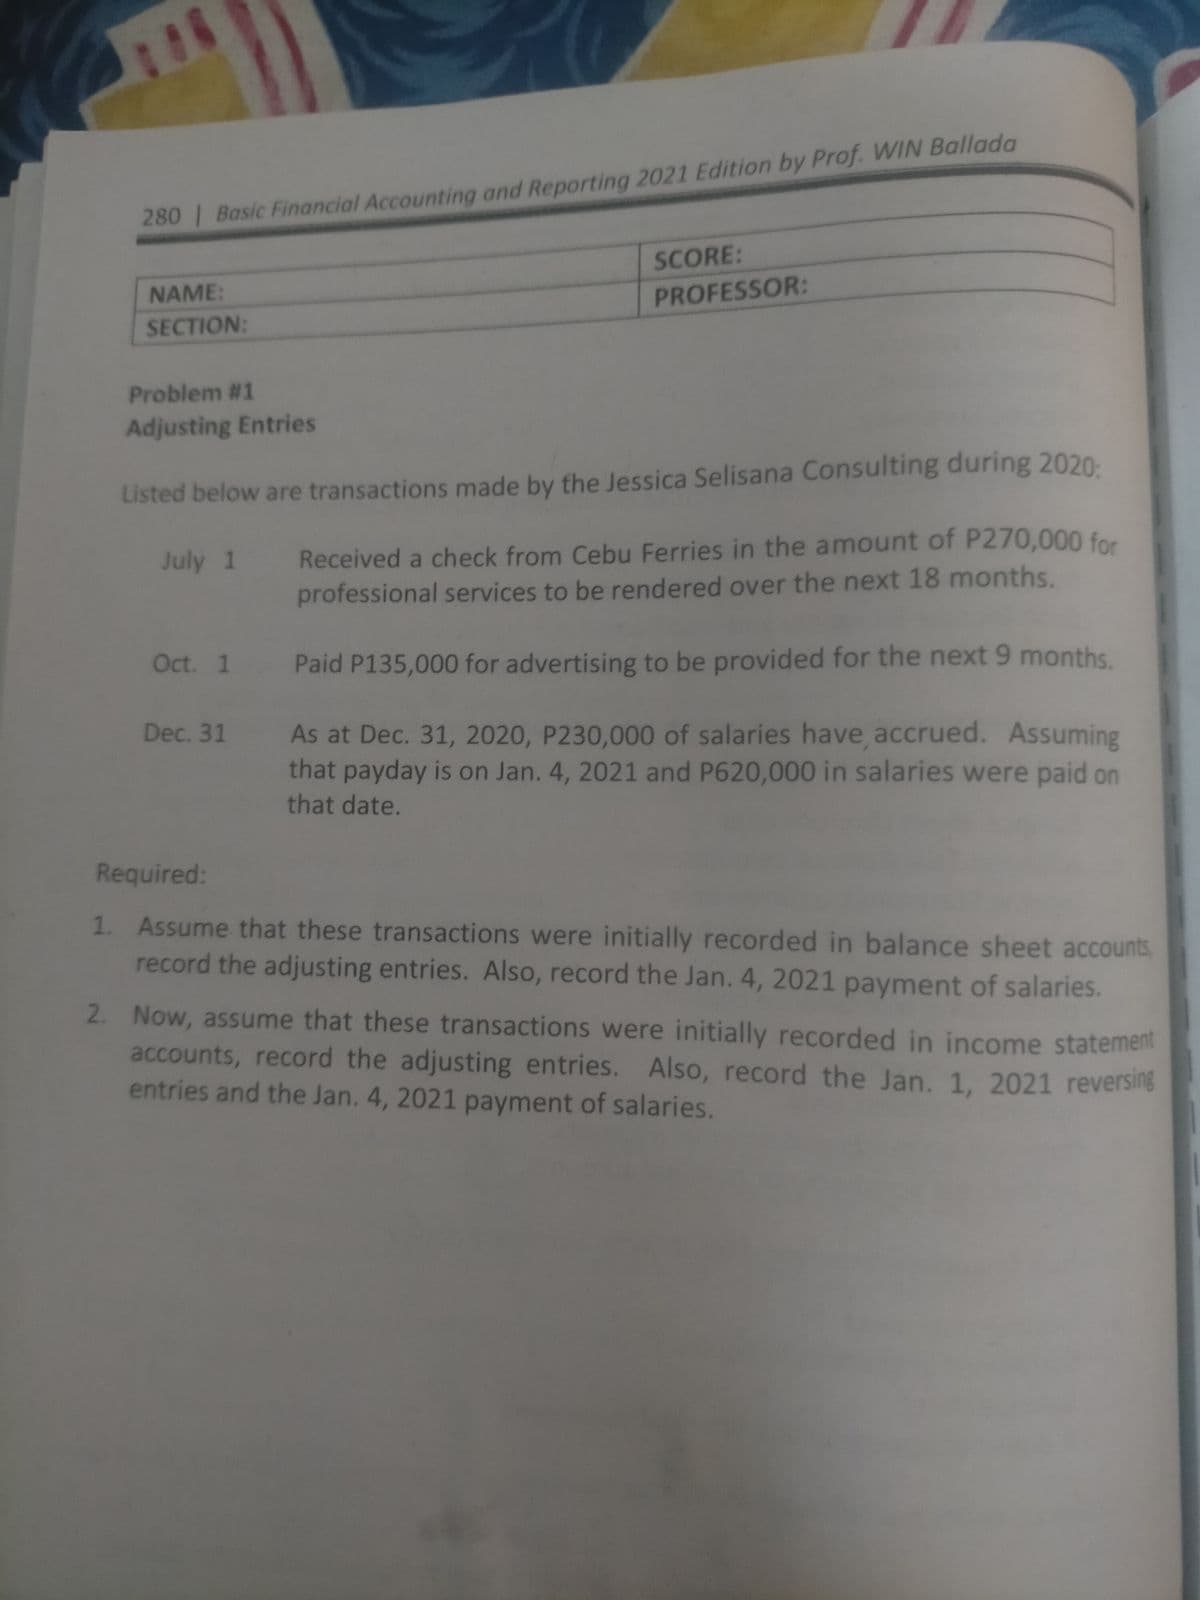 280 Basic Financial Accounting and Reporting 2021 Edition by Prof. WIN Ballada
SCORE:
NAME:
PROFESSOR:
SECTION:
Problem #1
Adjusting Entries
Listed below are transactions made by the Jessica Selisana Consulting during 2020:
Received a check from Cebu Ferries in the amount of P270,000 for
professional services to be rendered over the next 18 months.
July 1
Oct. 1
Paid P135,000 for advertising to be provided for the next 9 months.
Dec. 31 As at Dec. 31, 2020, P230,000 of salaries have accrued. Assuming
that payday is on Jan. 4, 2021 and P620,000 in salaries were paid on
that date.
Required:
1. Assume that these transactions were initially recorded in balance sheet accounts
record the adjusting entries. Also, record the Jan. 4, 2021 payment of salaries.
2. Now, assume that these transactions were initially recorded in income statement
accounts, record the adjusting entries. Also, record the Jan. 1, 2021 reversing
entries and the Jan. 4, 2021 payment of salaries.
